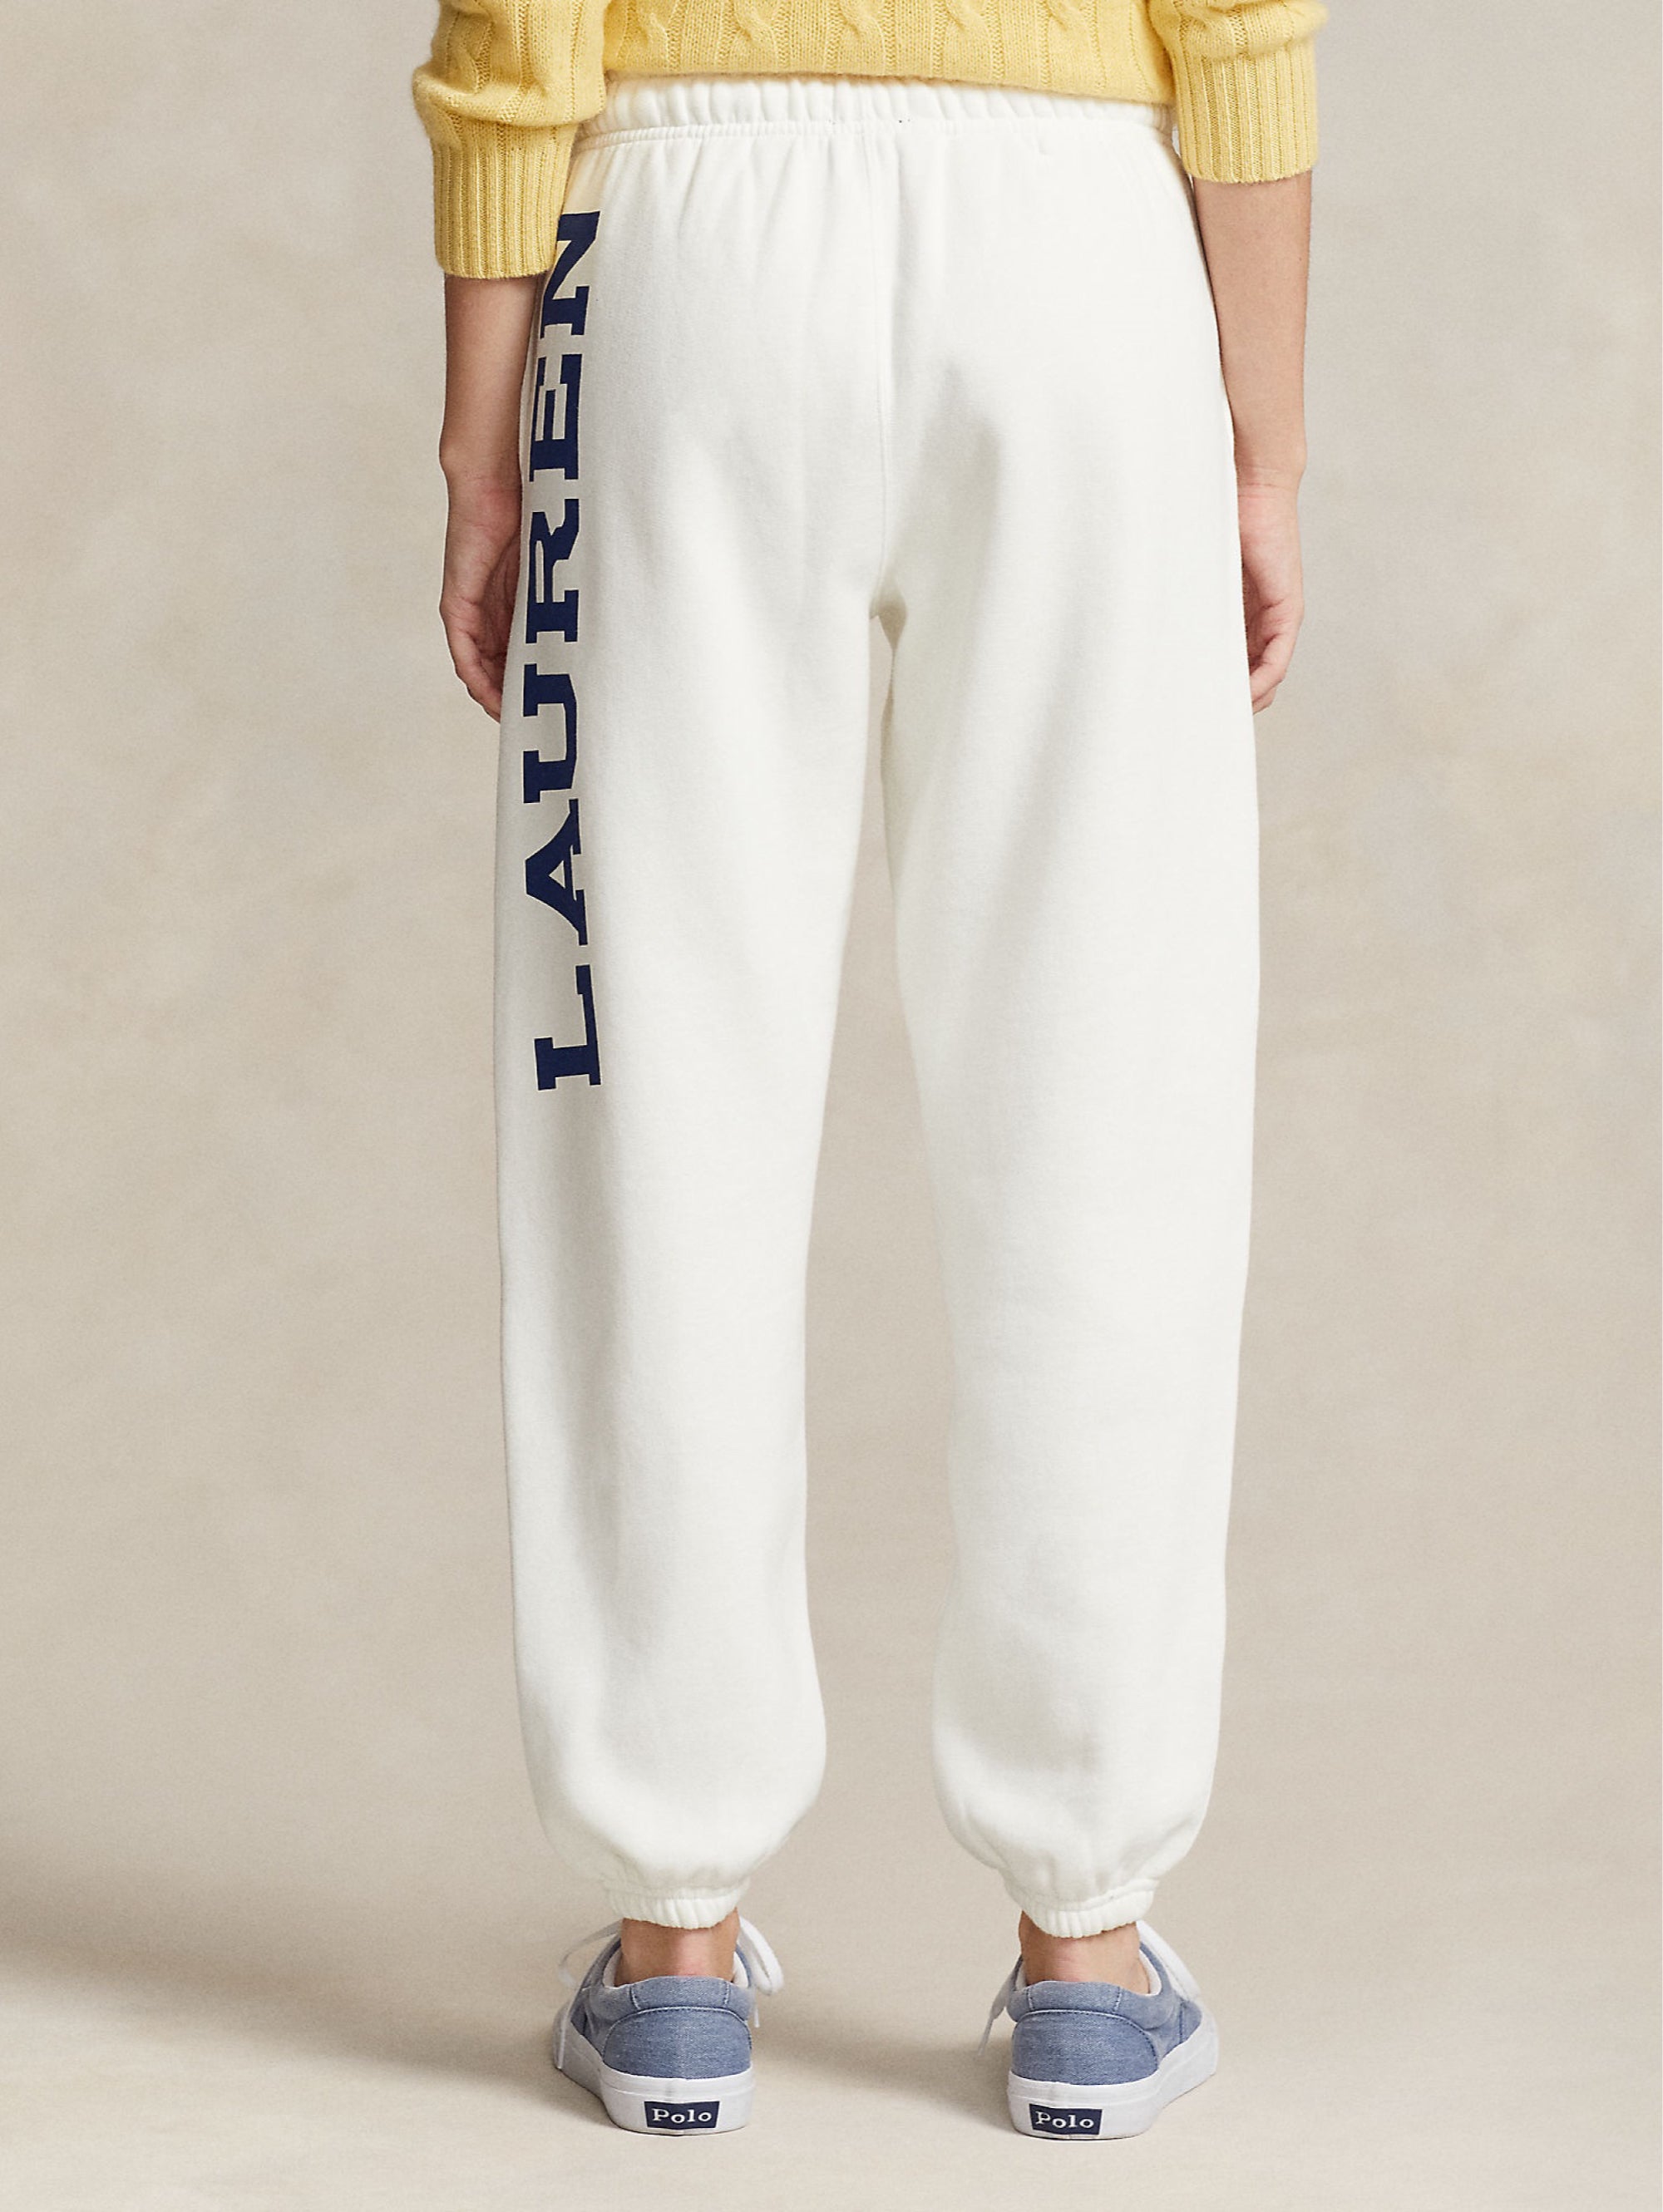 Jogging Pants with Ralph Lauren White Writing